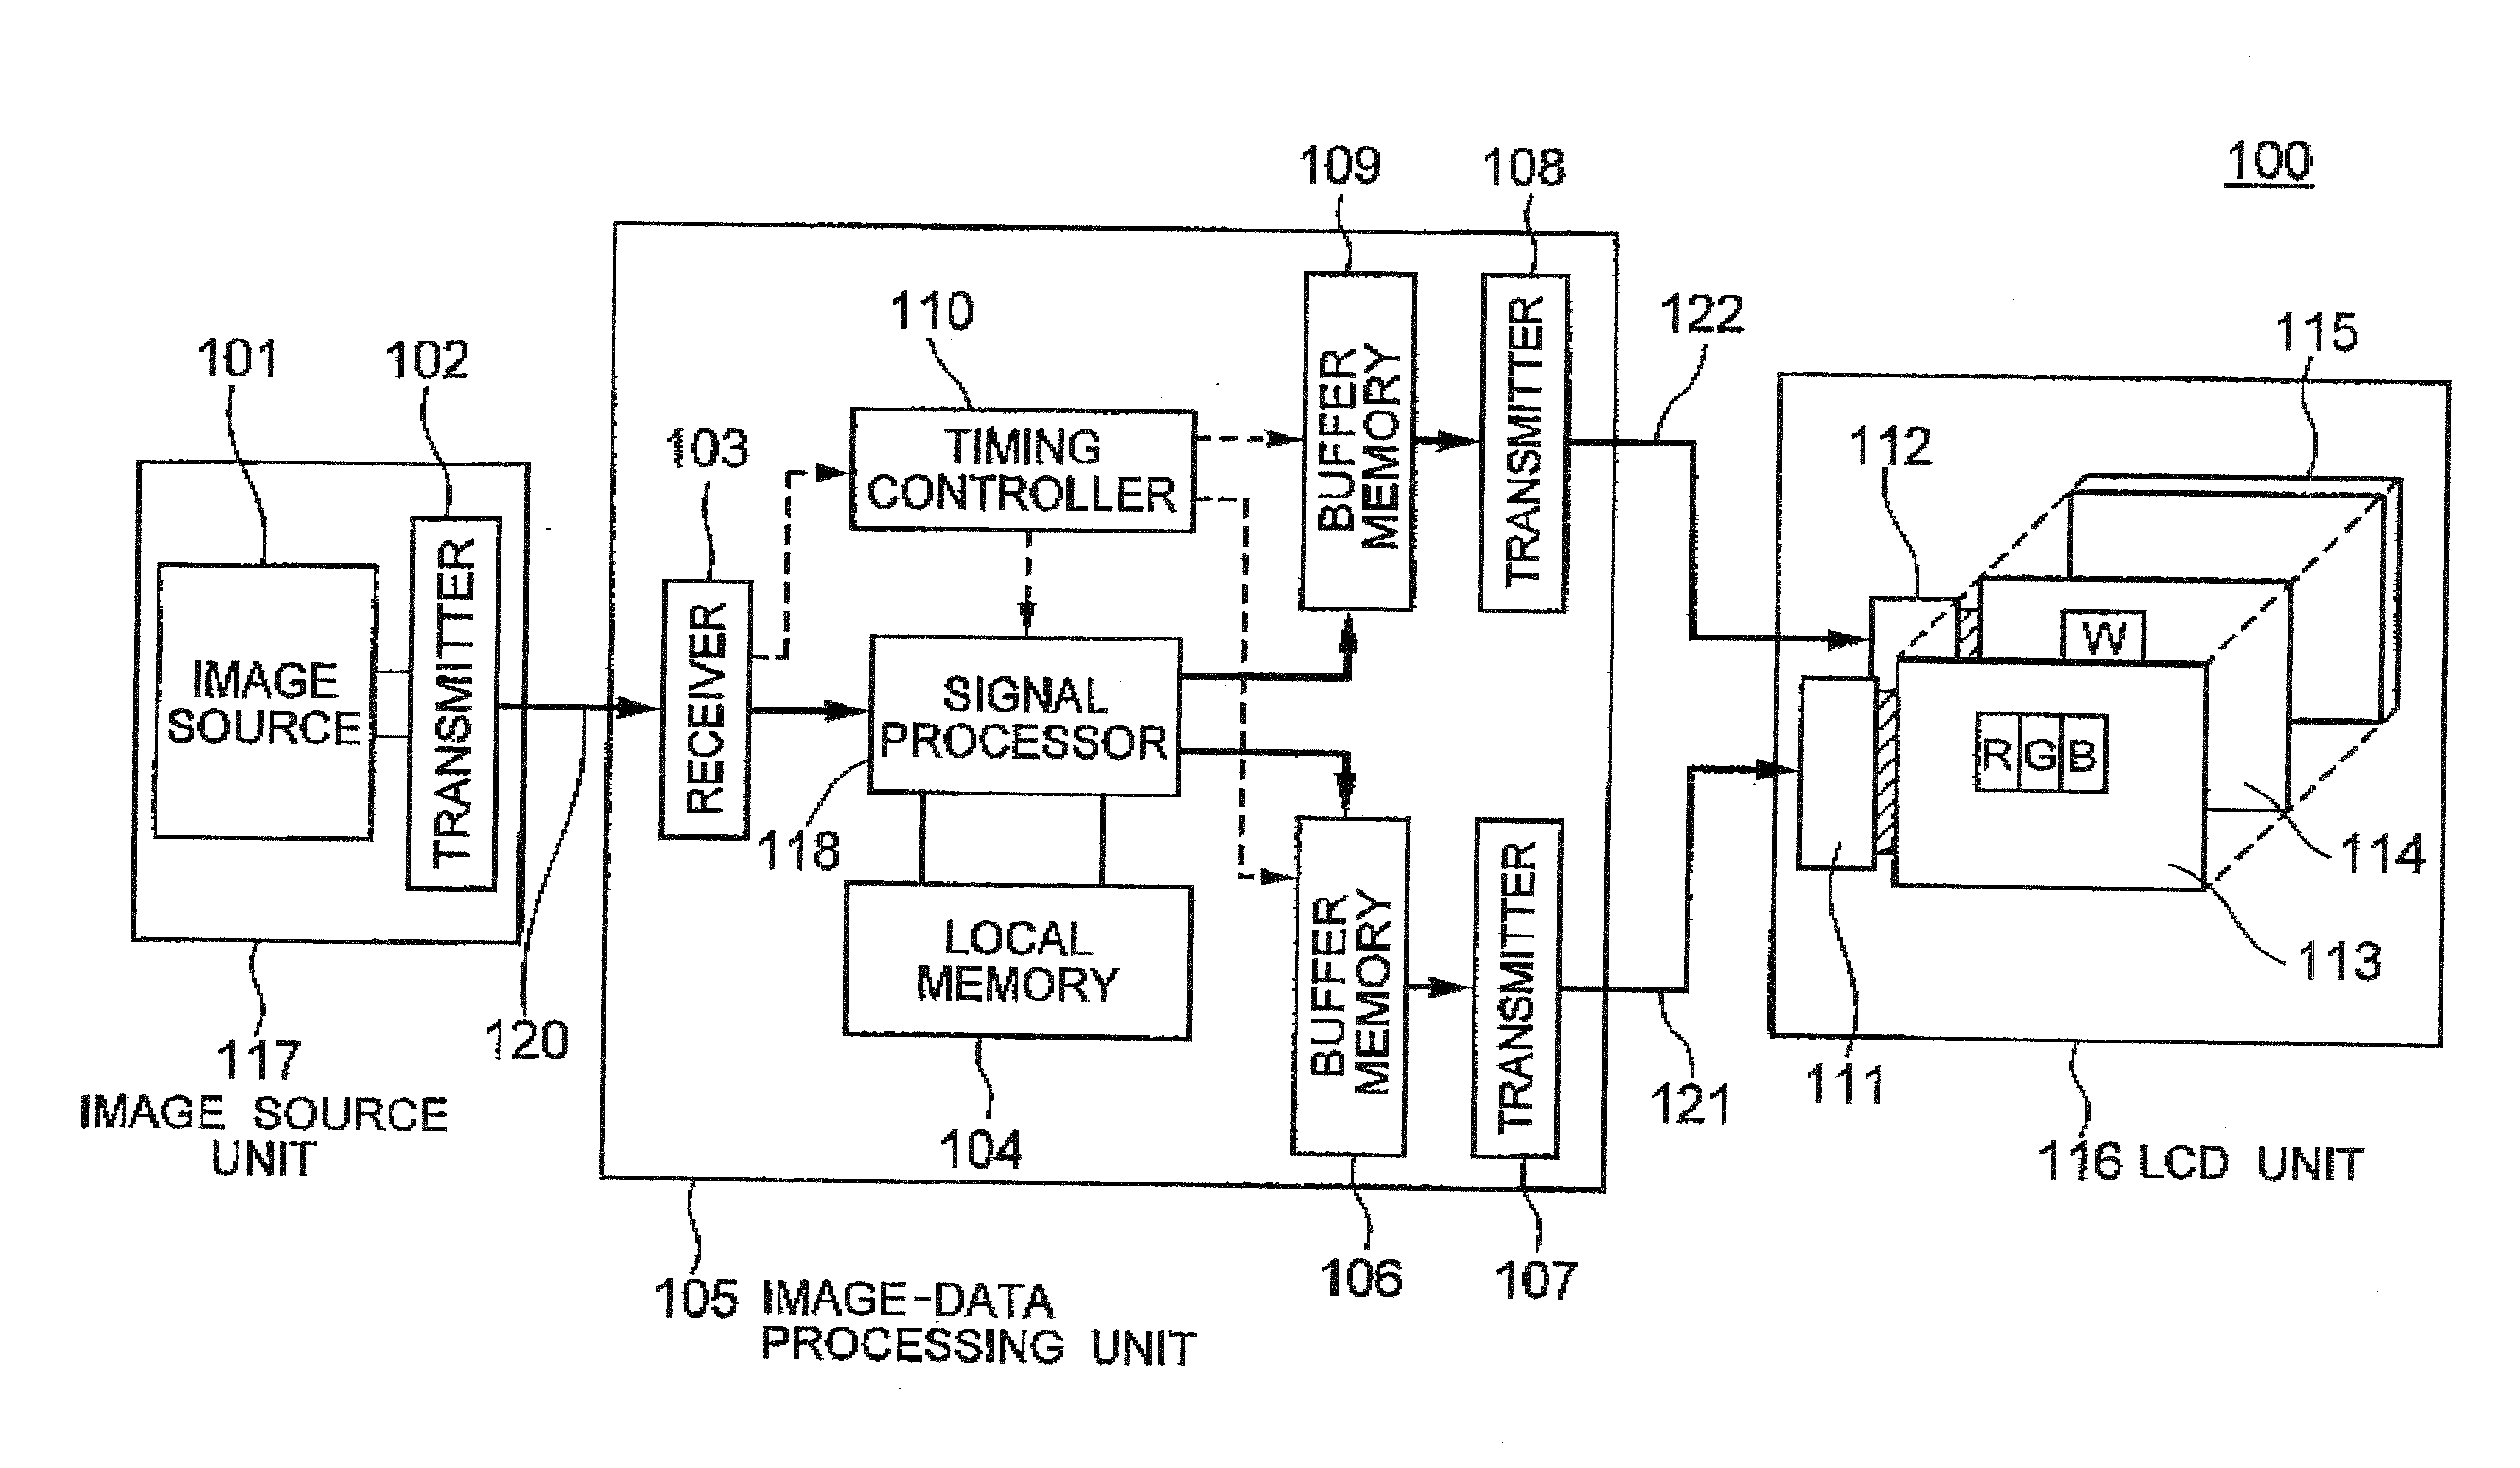 Liquid crystal display unit and system including a plurality of stacked display devices, and drive circuit